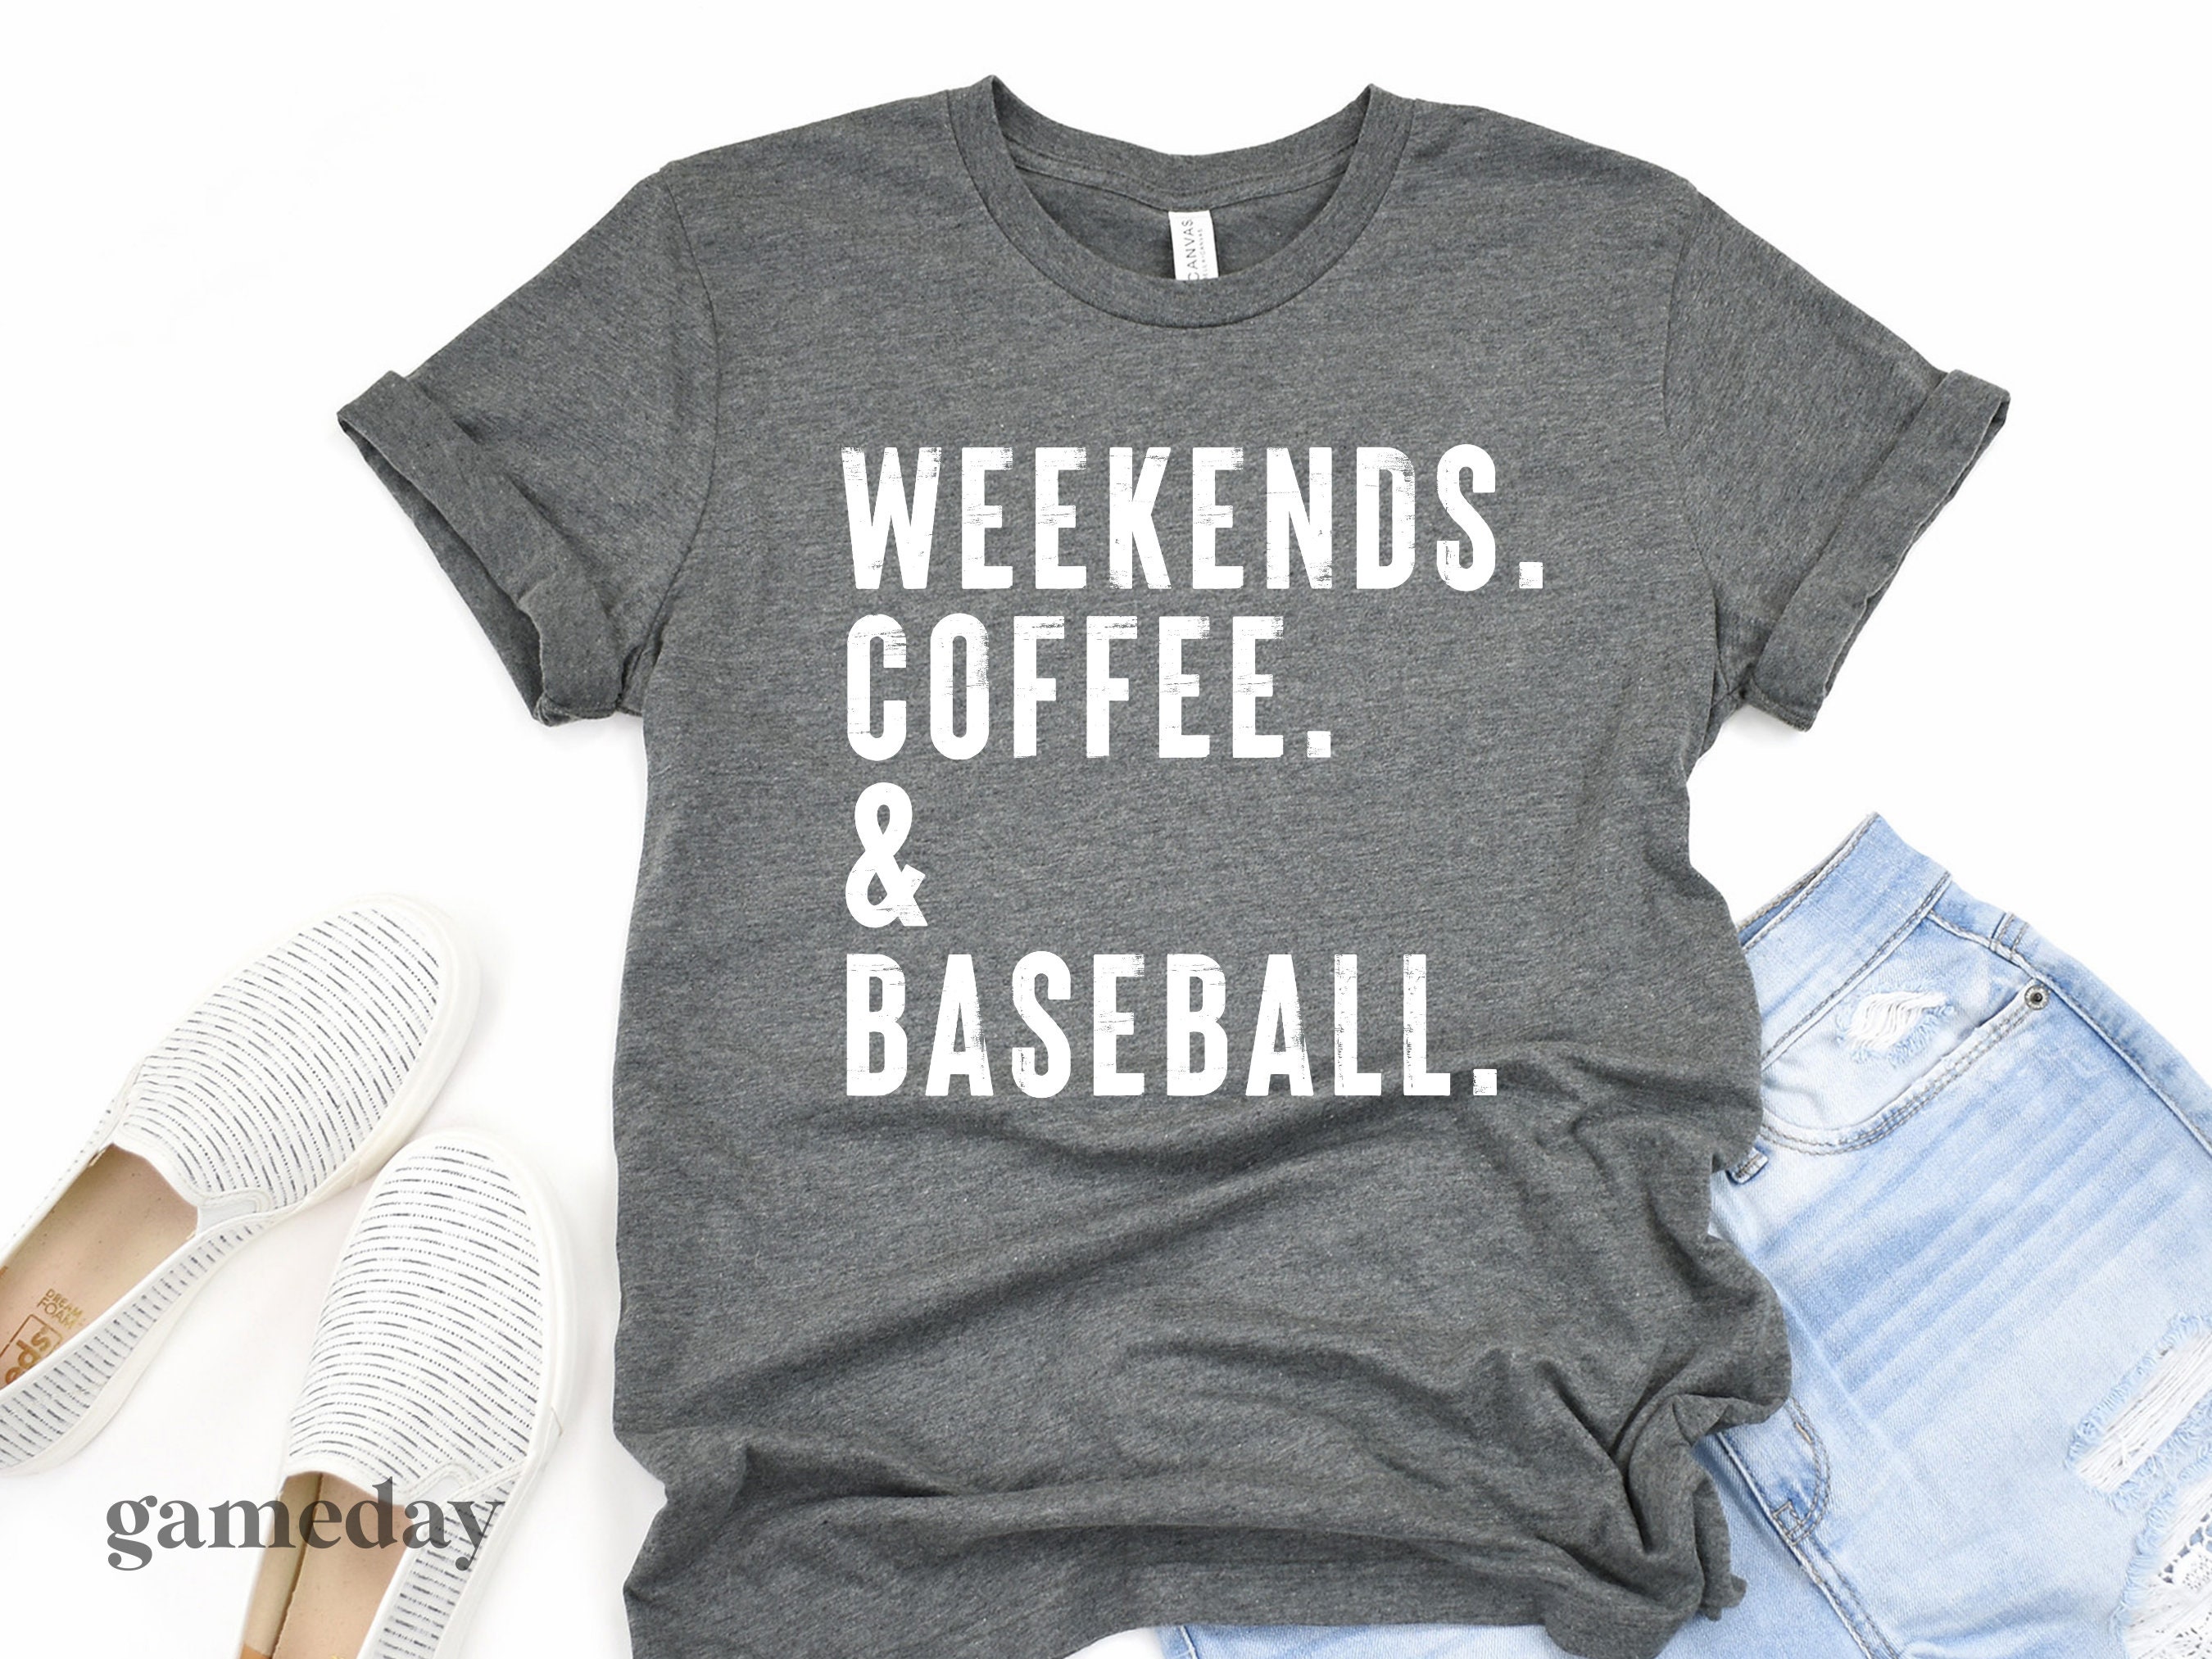 55 Best Baseball T-Shirts Sayings and/or Designs I like ideas